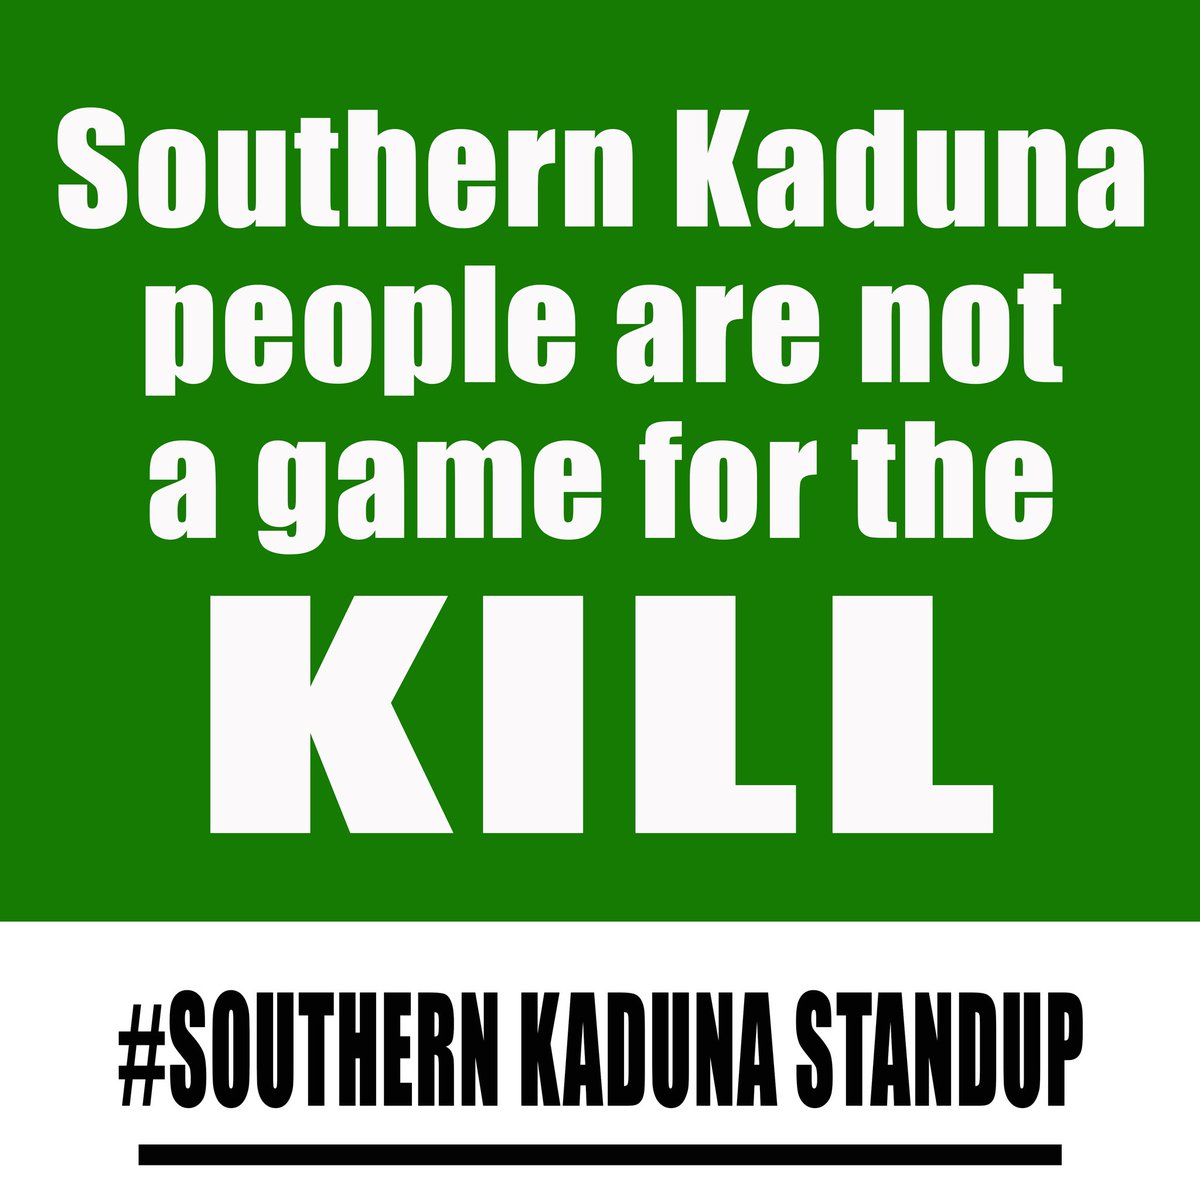 Protests against #SouthernKadunaKillings will take place tomorrow at the following locations;

Kaduna: Refinery Junction Abuja: Unity Fountain
Lagos: Maryland 
Time is 9 am
Dress code: black
Face masks: compulsory.

#SouthernKaduna
#SouthernKadunaMassacre
#SouthernKadunaGenocide